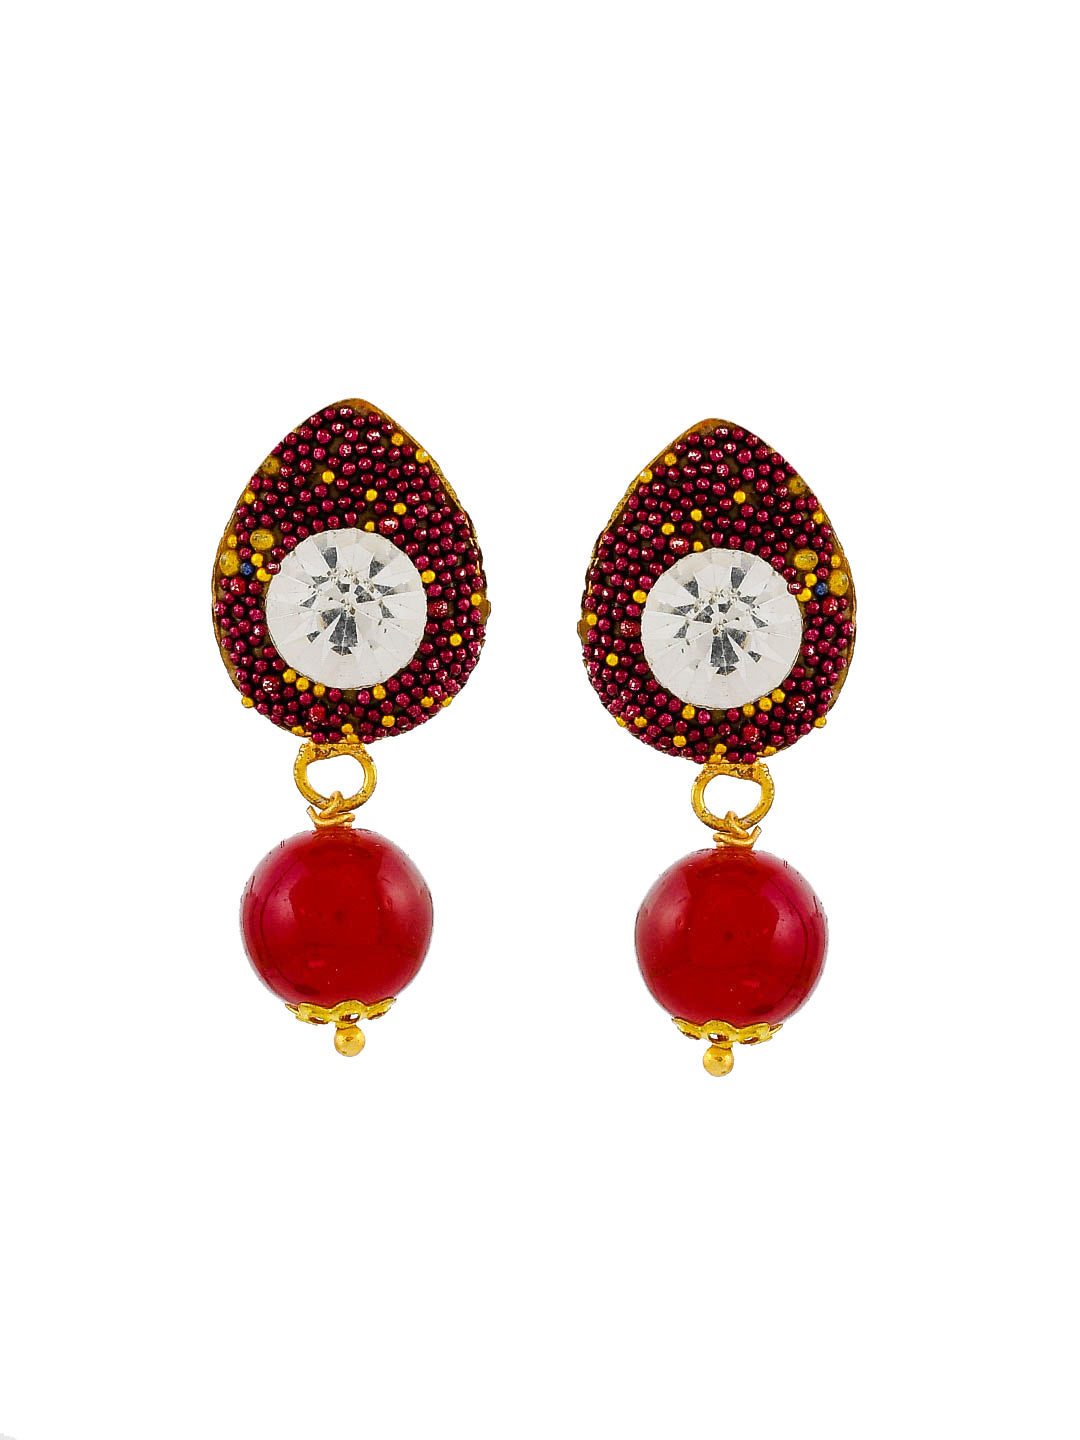 Red Meenakari Long Necklace With Earrings